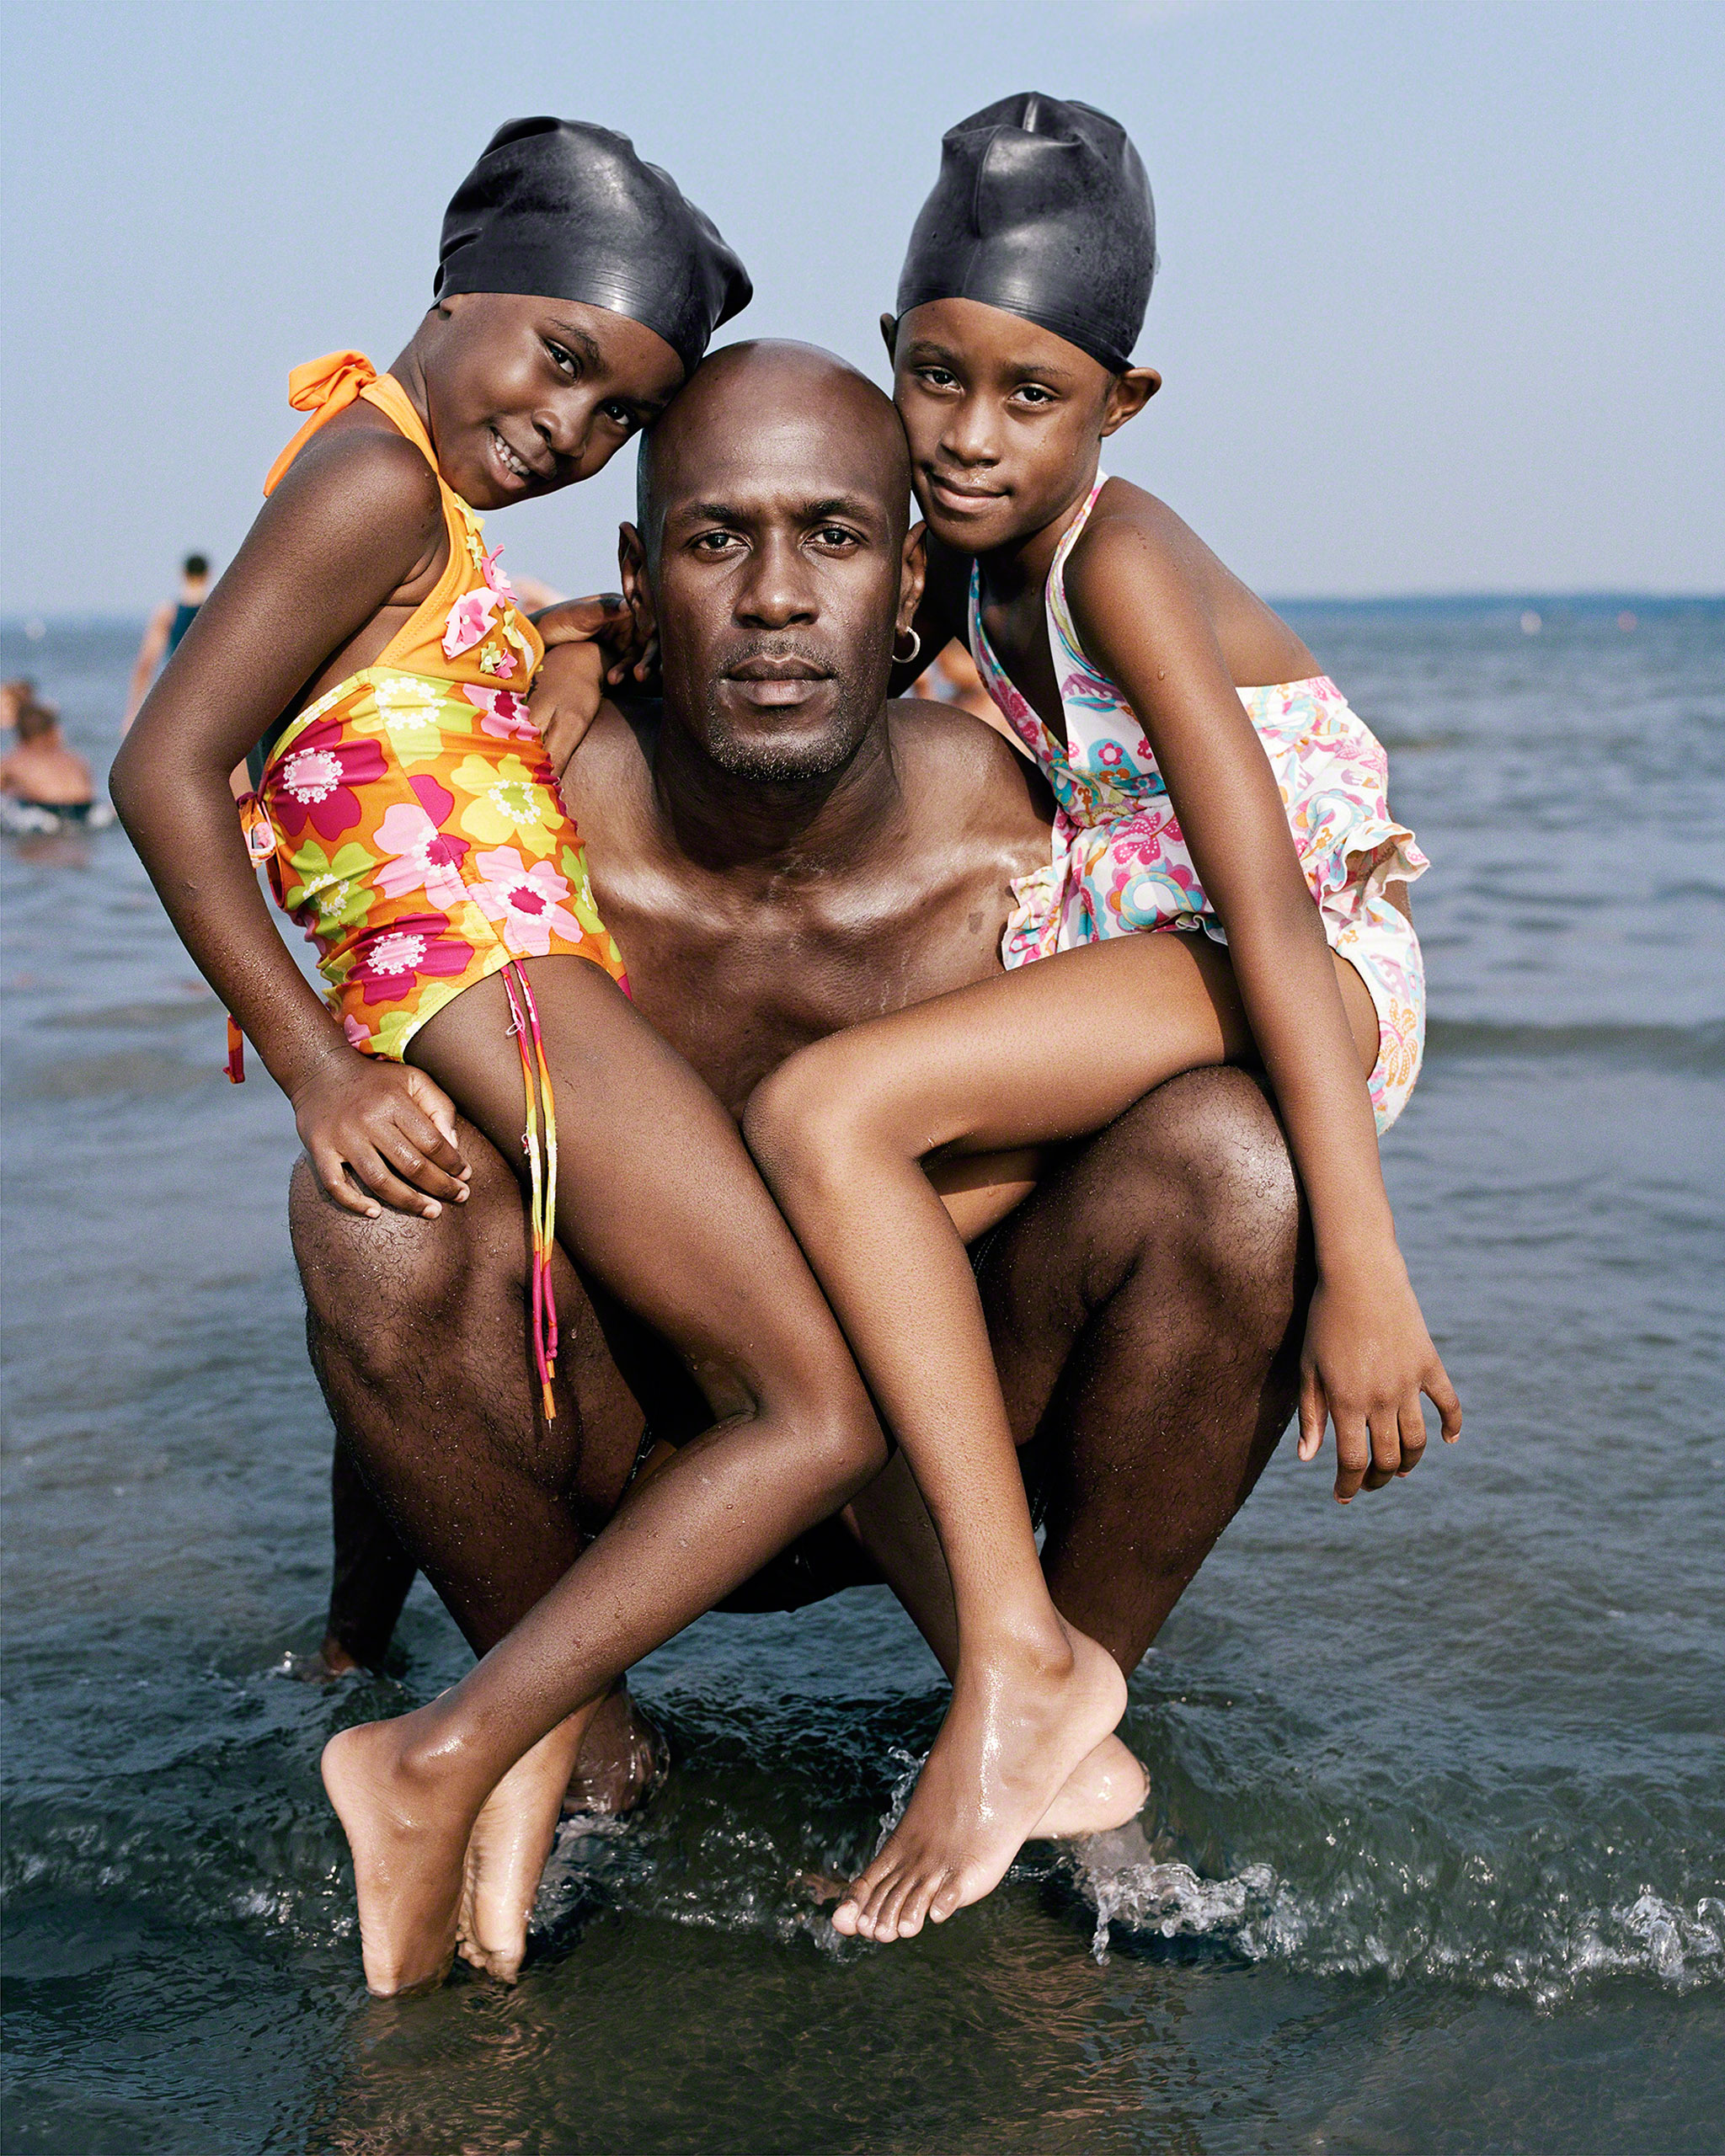 “Kye, Kaiya and Kamren," 2009, from “Orchard Beach: The Bronx Riviera,” a series and book of summer regulars on the only beach in the Bronx, New York.